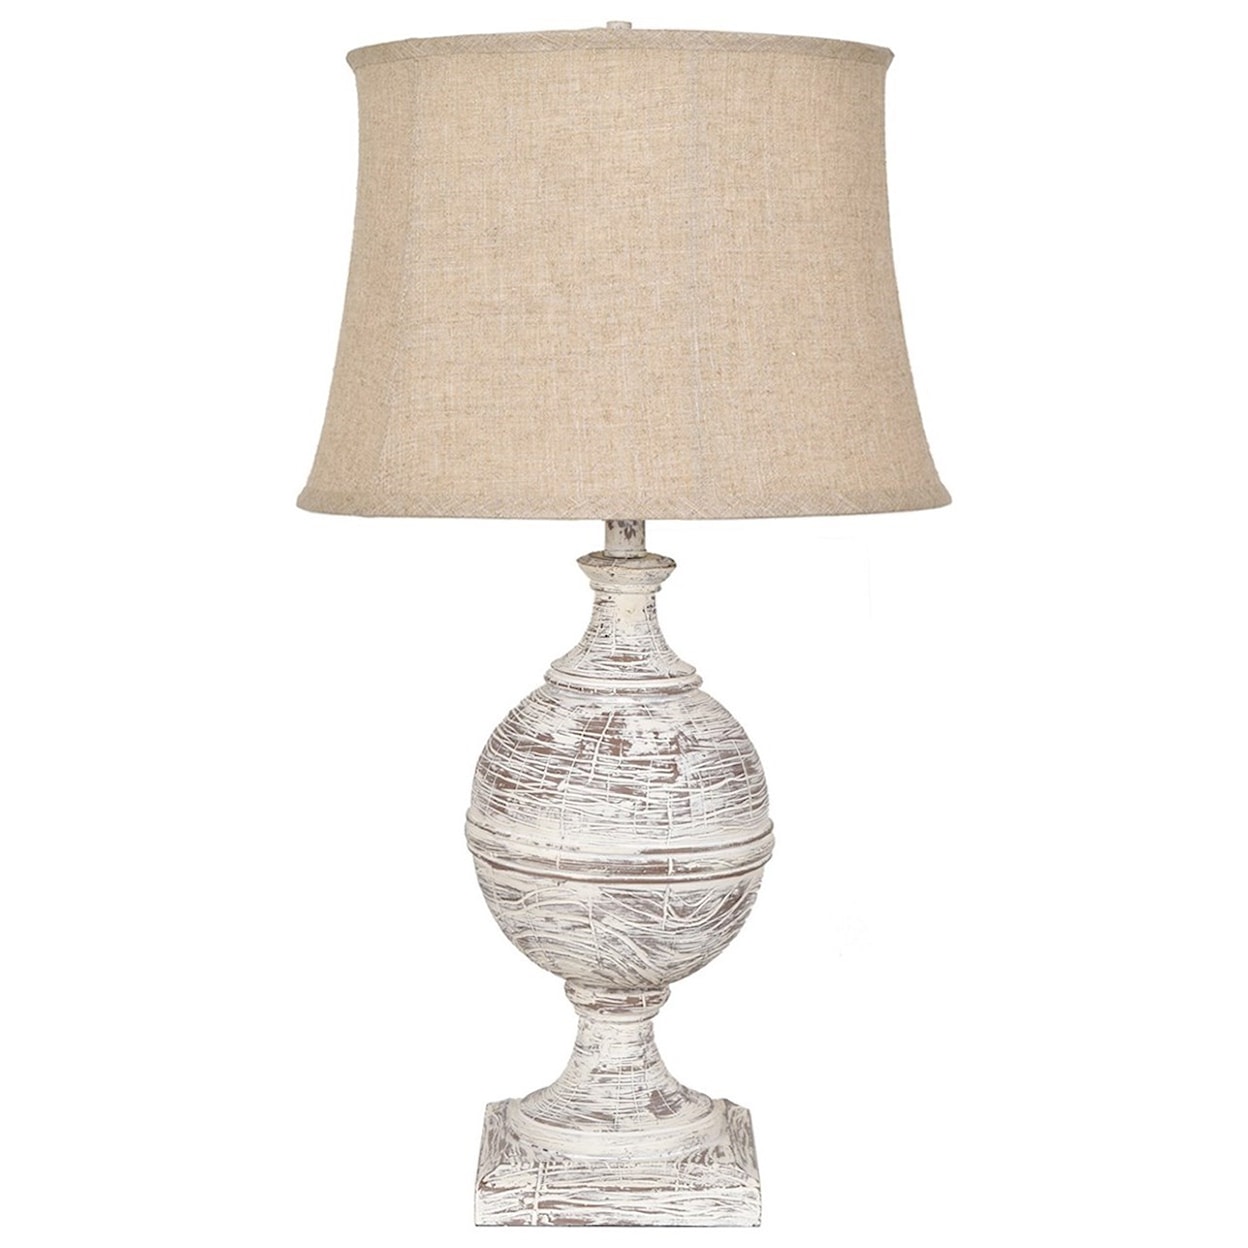 Crestview Collection Lighting Post Knob Table Lamp